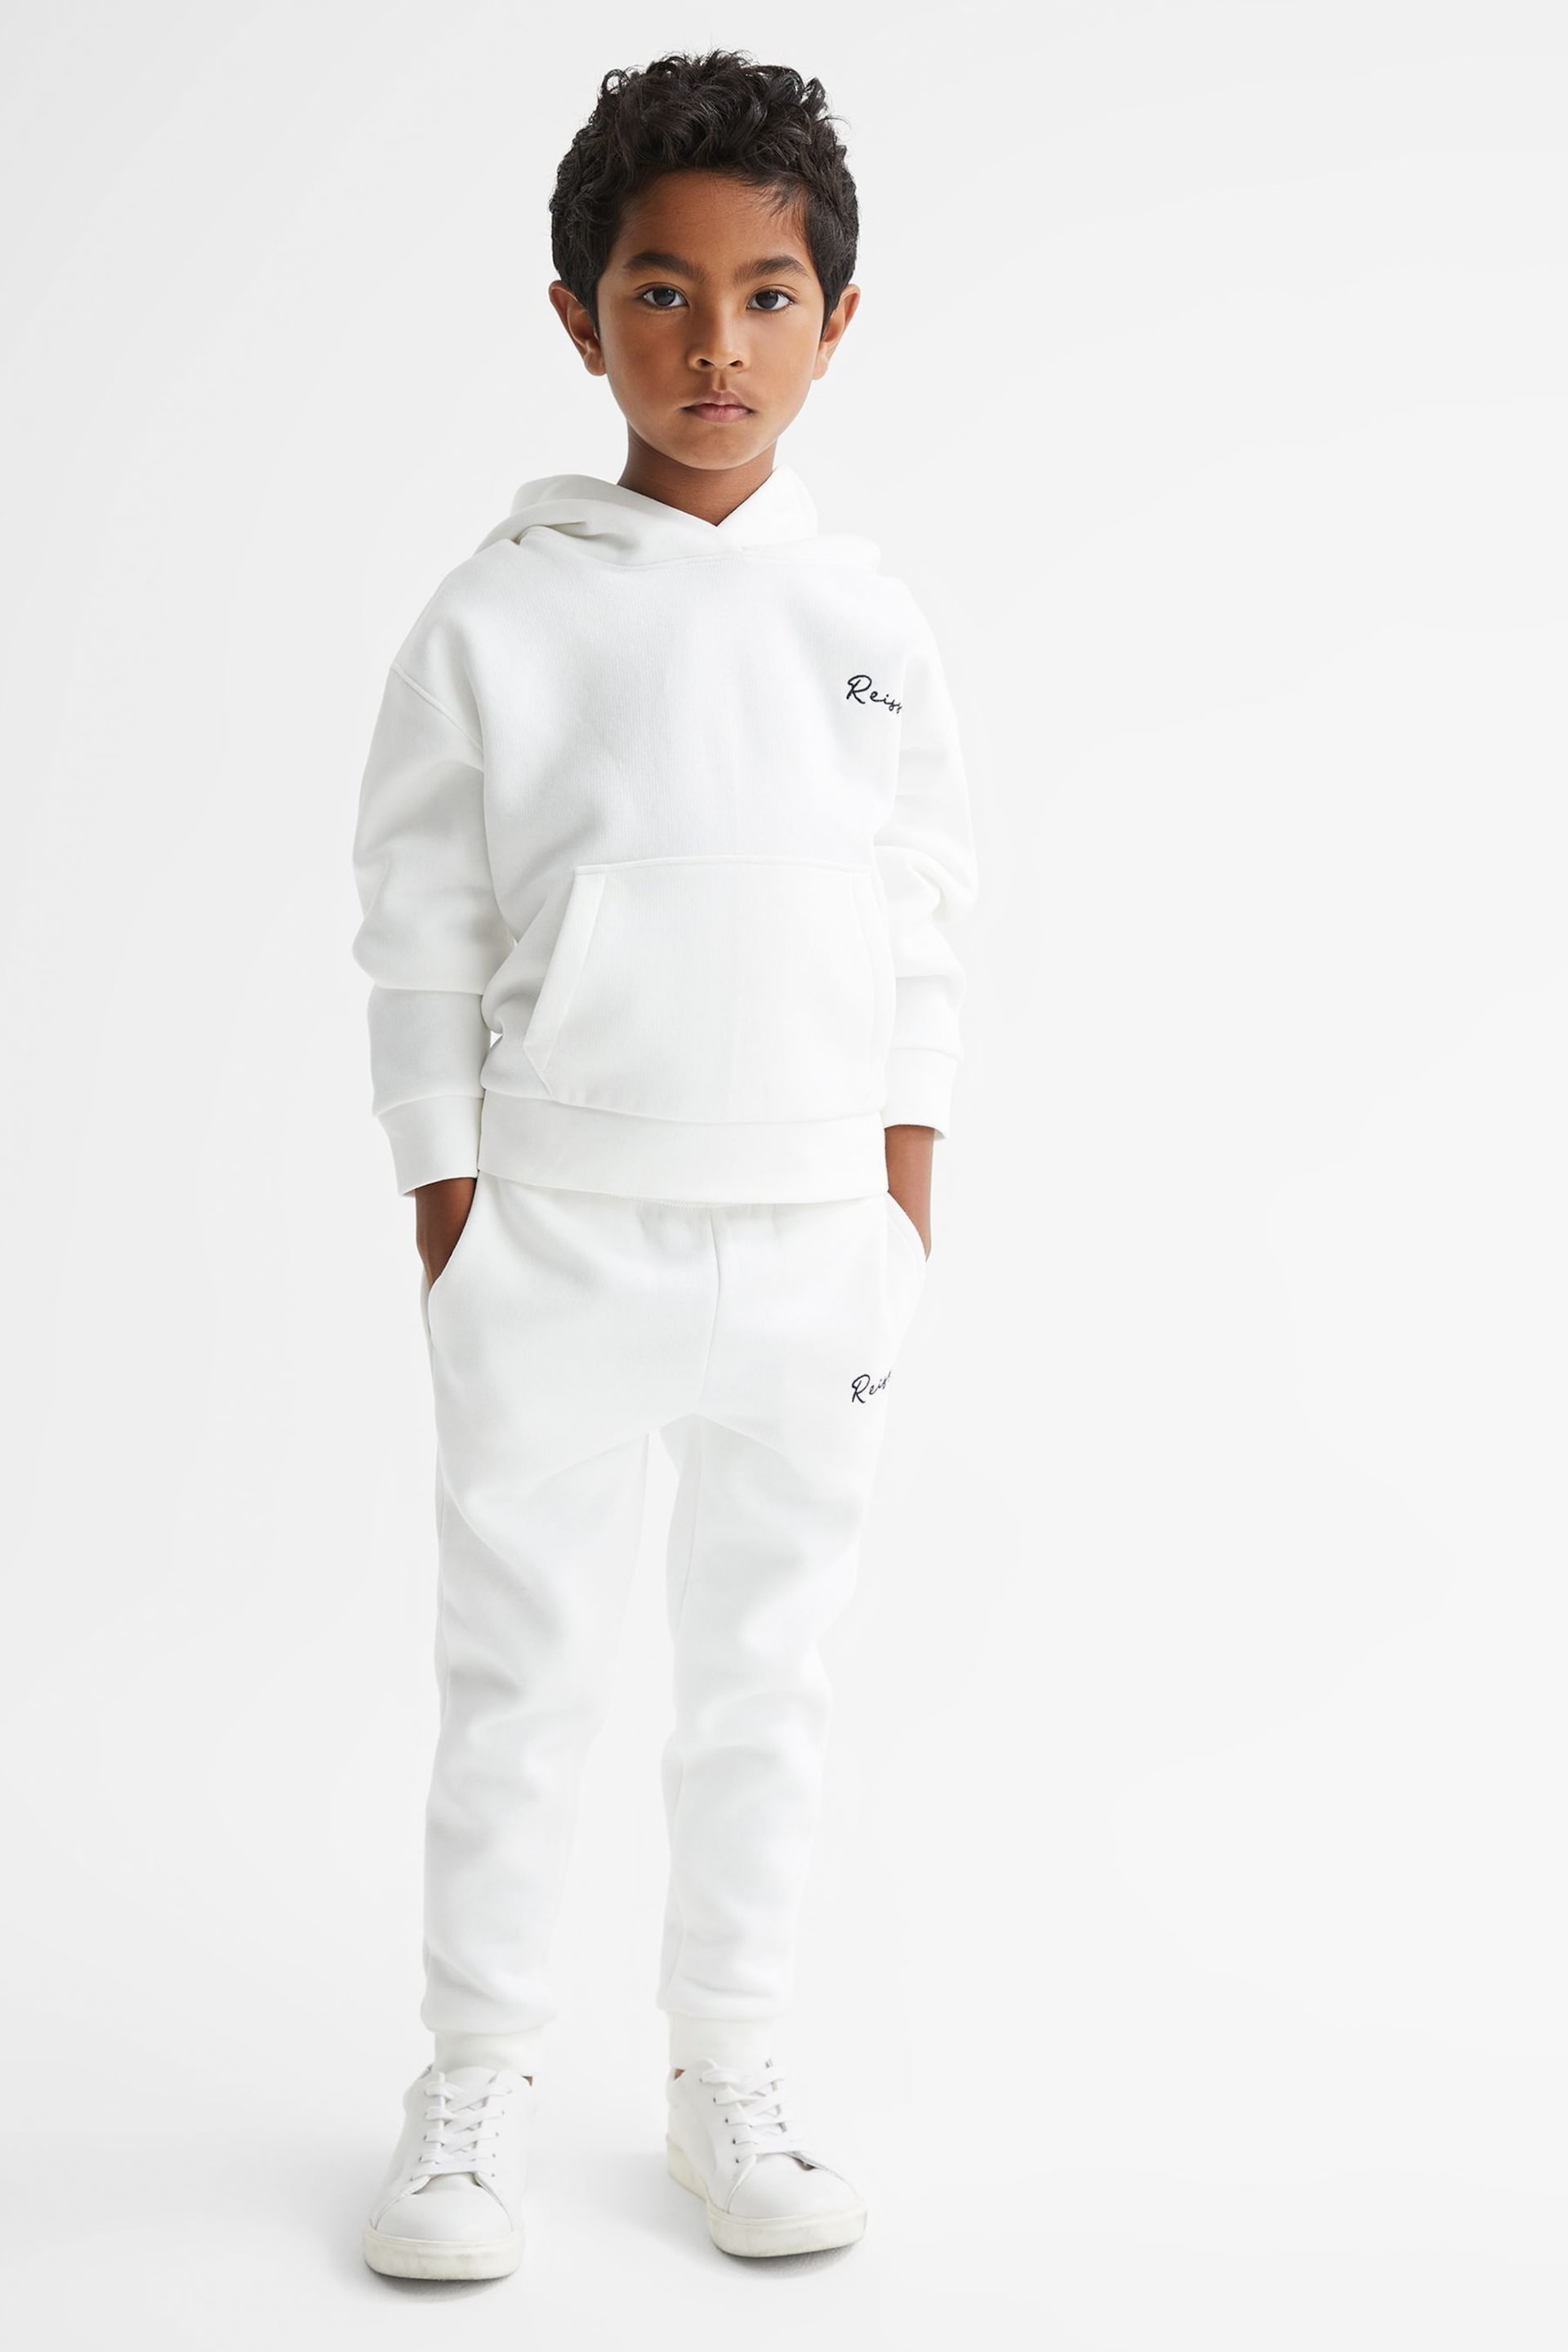 Reiss Ecru Connor Junior Embroidered Jersey Hoodie - Image 4 of 11